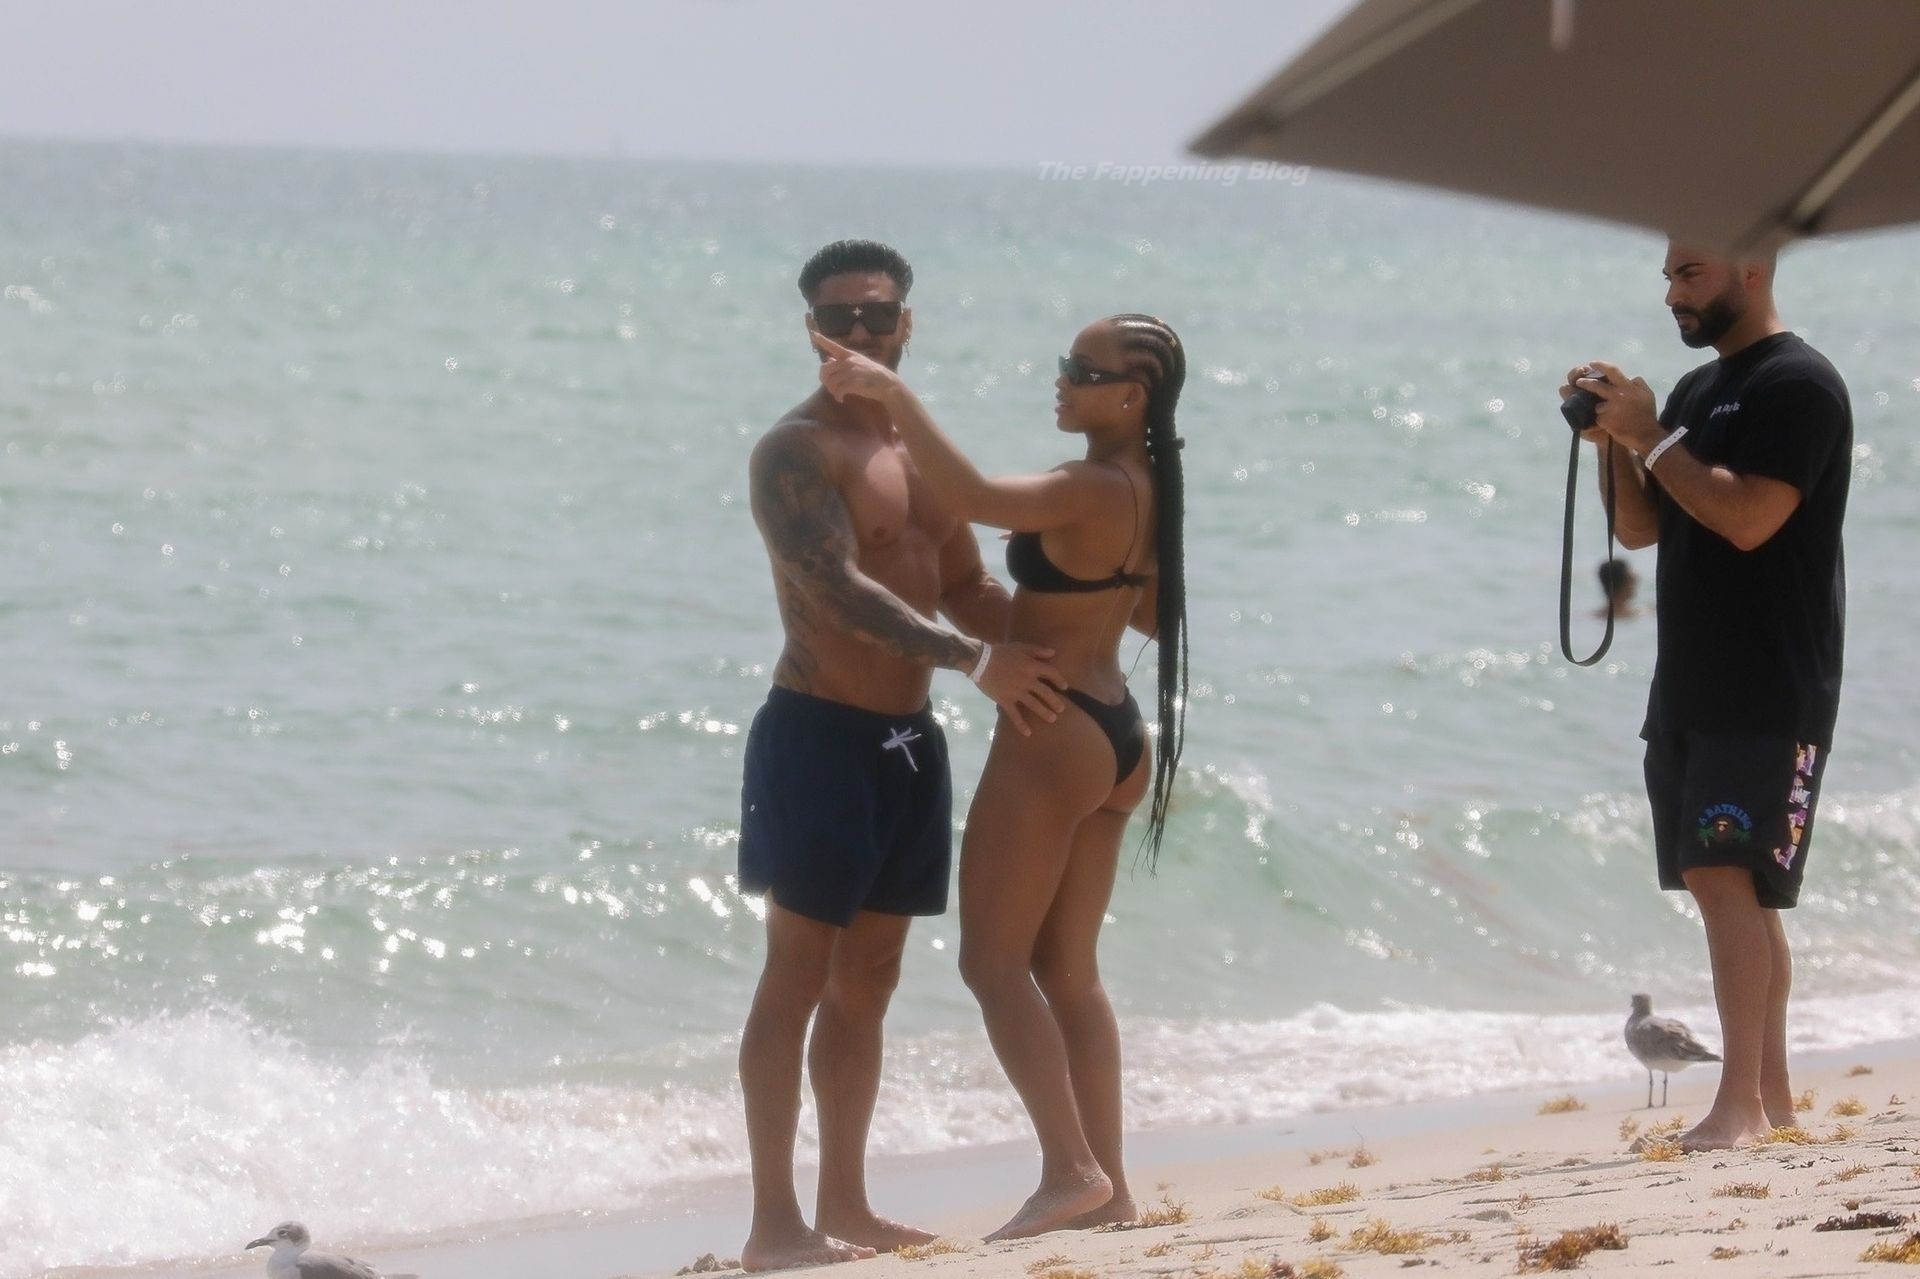 Pauly D & Nikki Hall Works On Their Tans Together in Miami Be
ach (27 Photos)